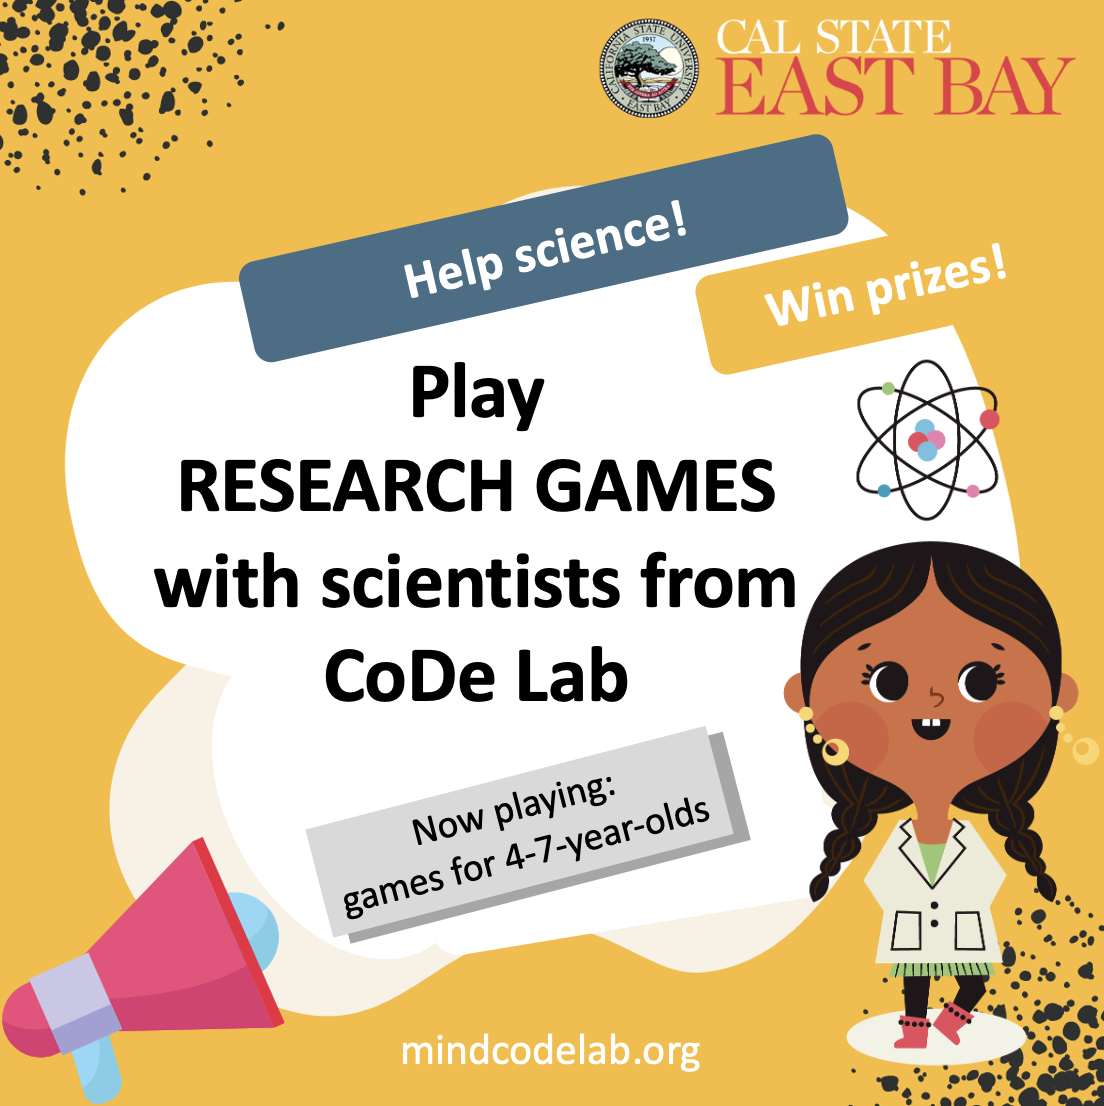 yellow background with kid scientist pictured, text reads play research games with scientists from CoDe lab